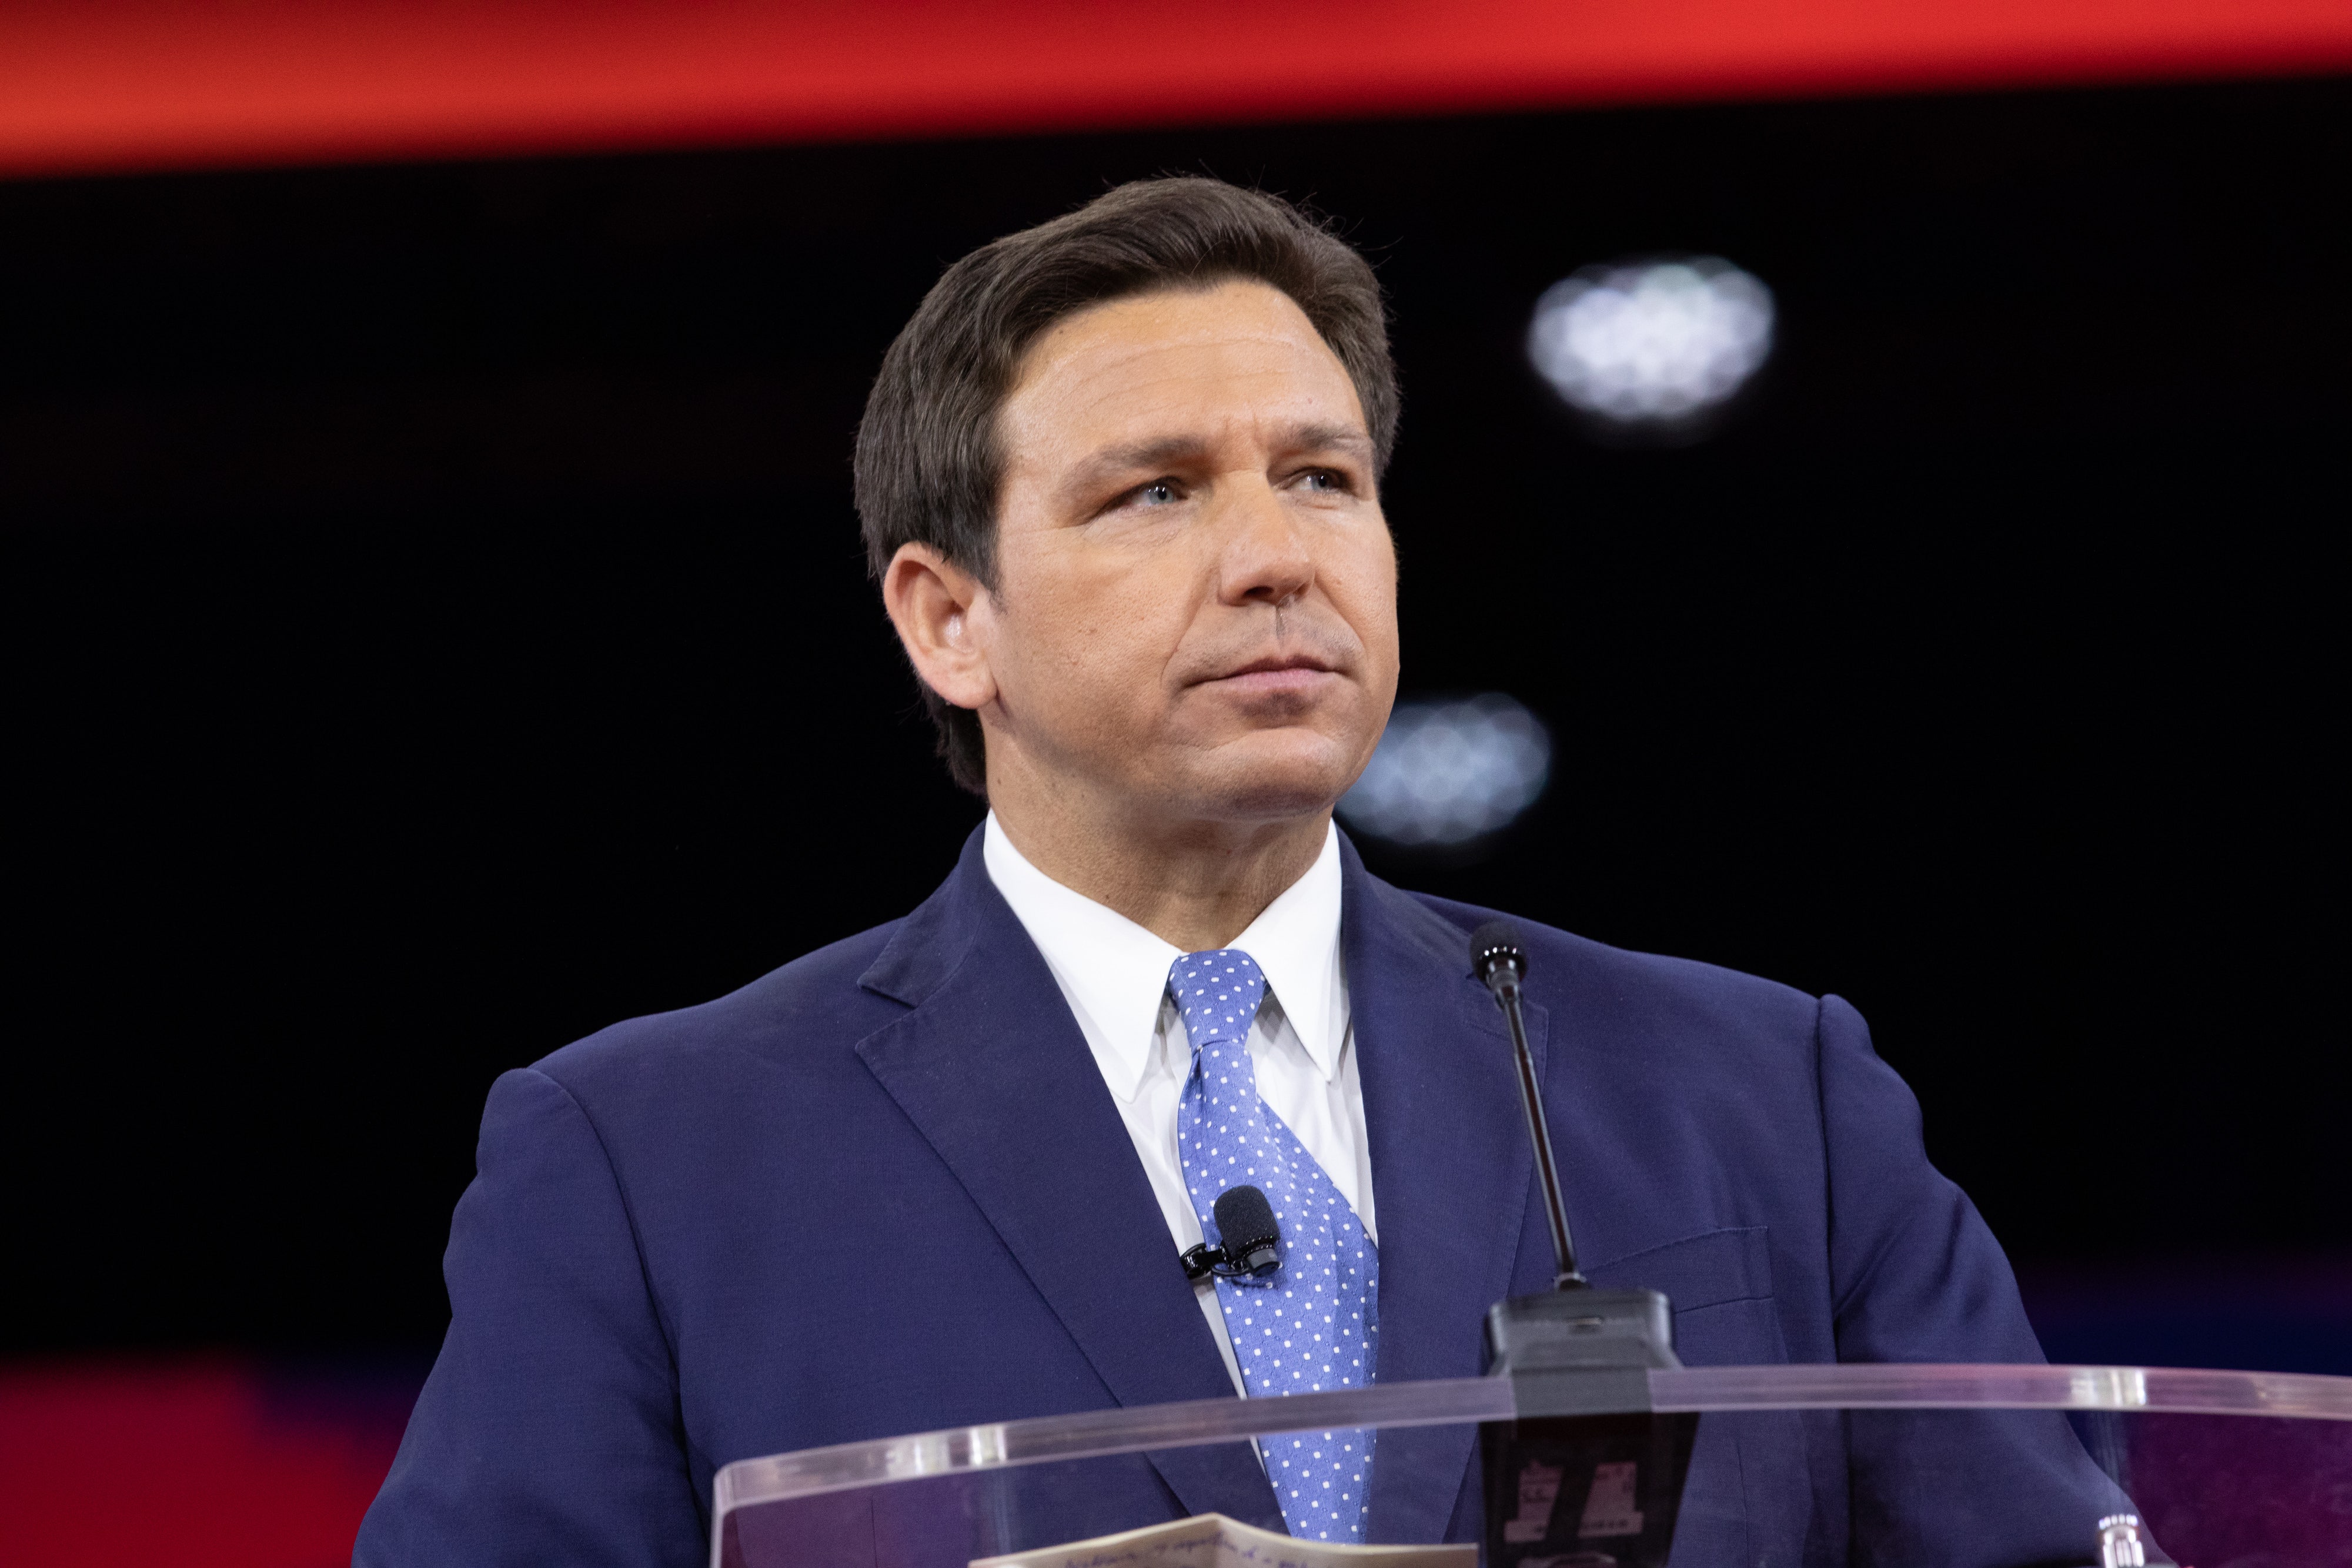 DeSantis didn't know staff declined 'The View' invite, has no interest in 'partisan corporate media'